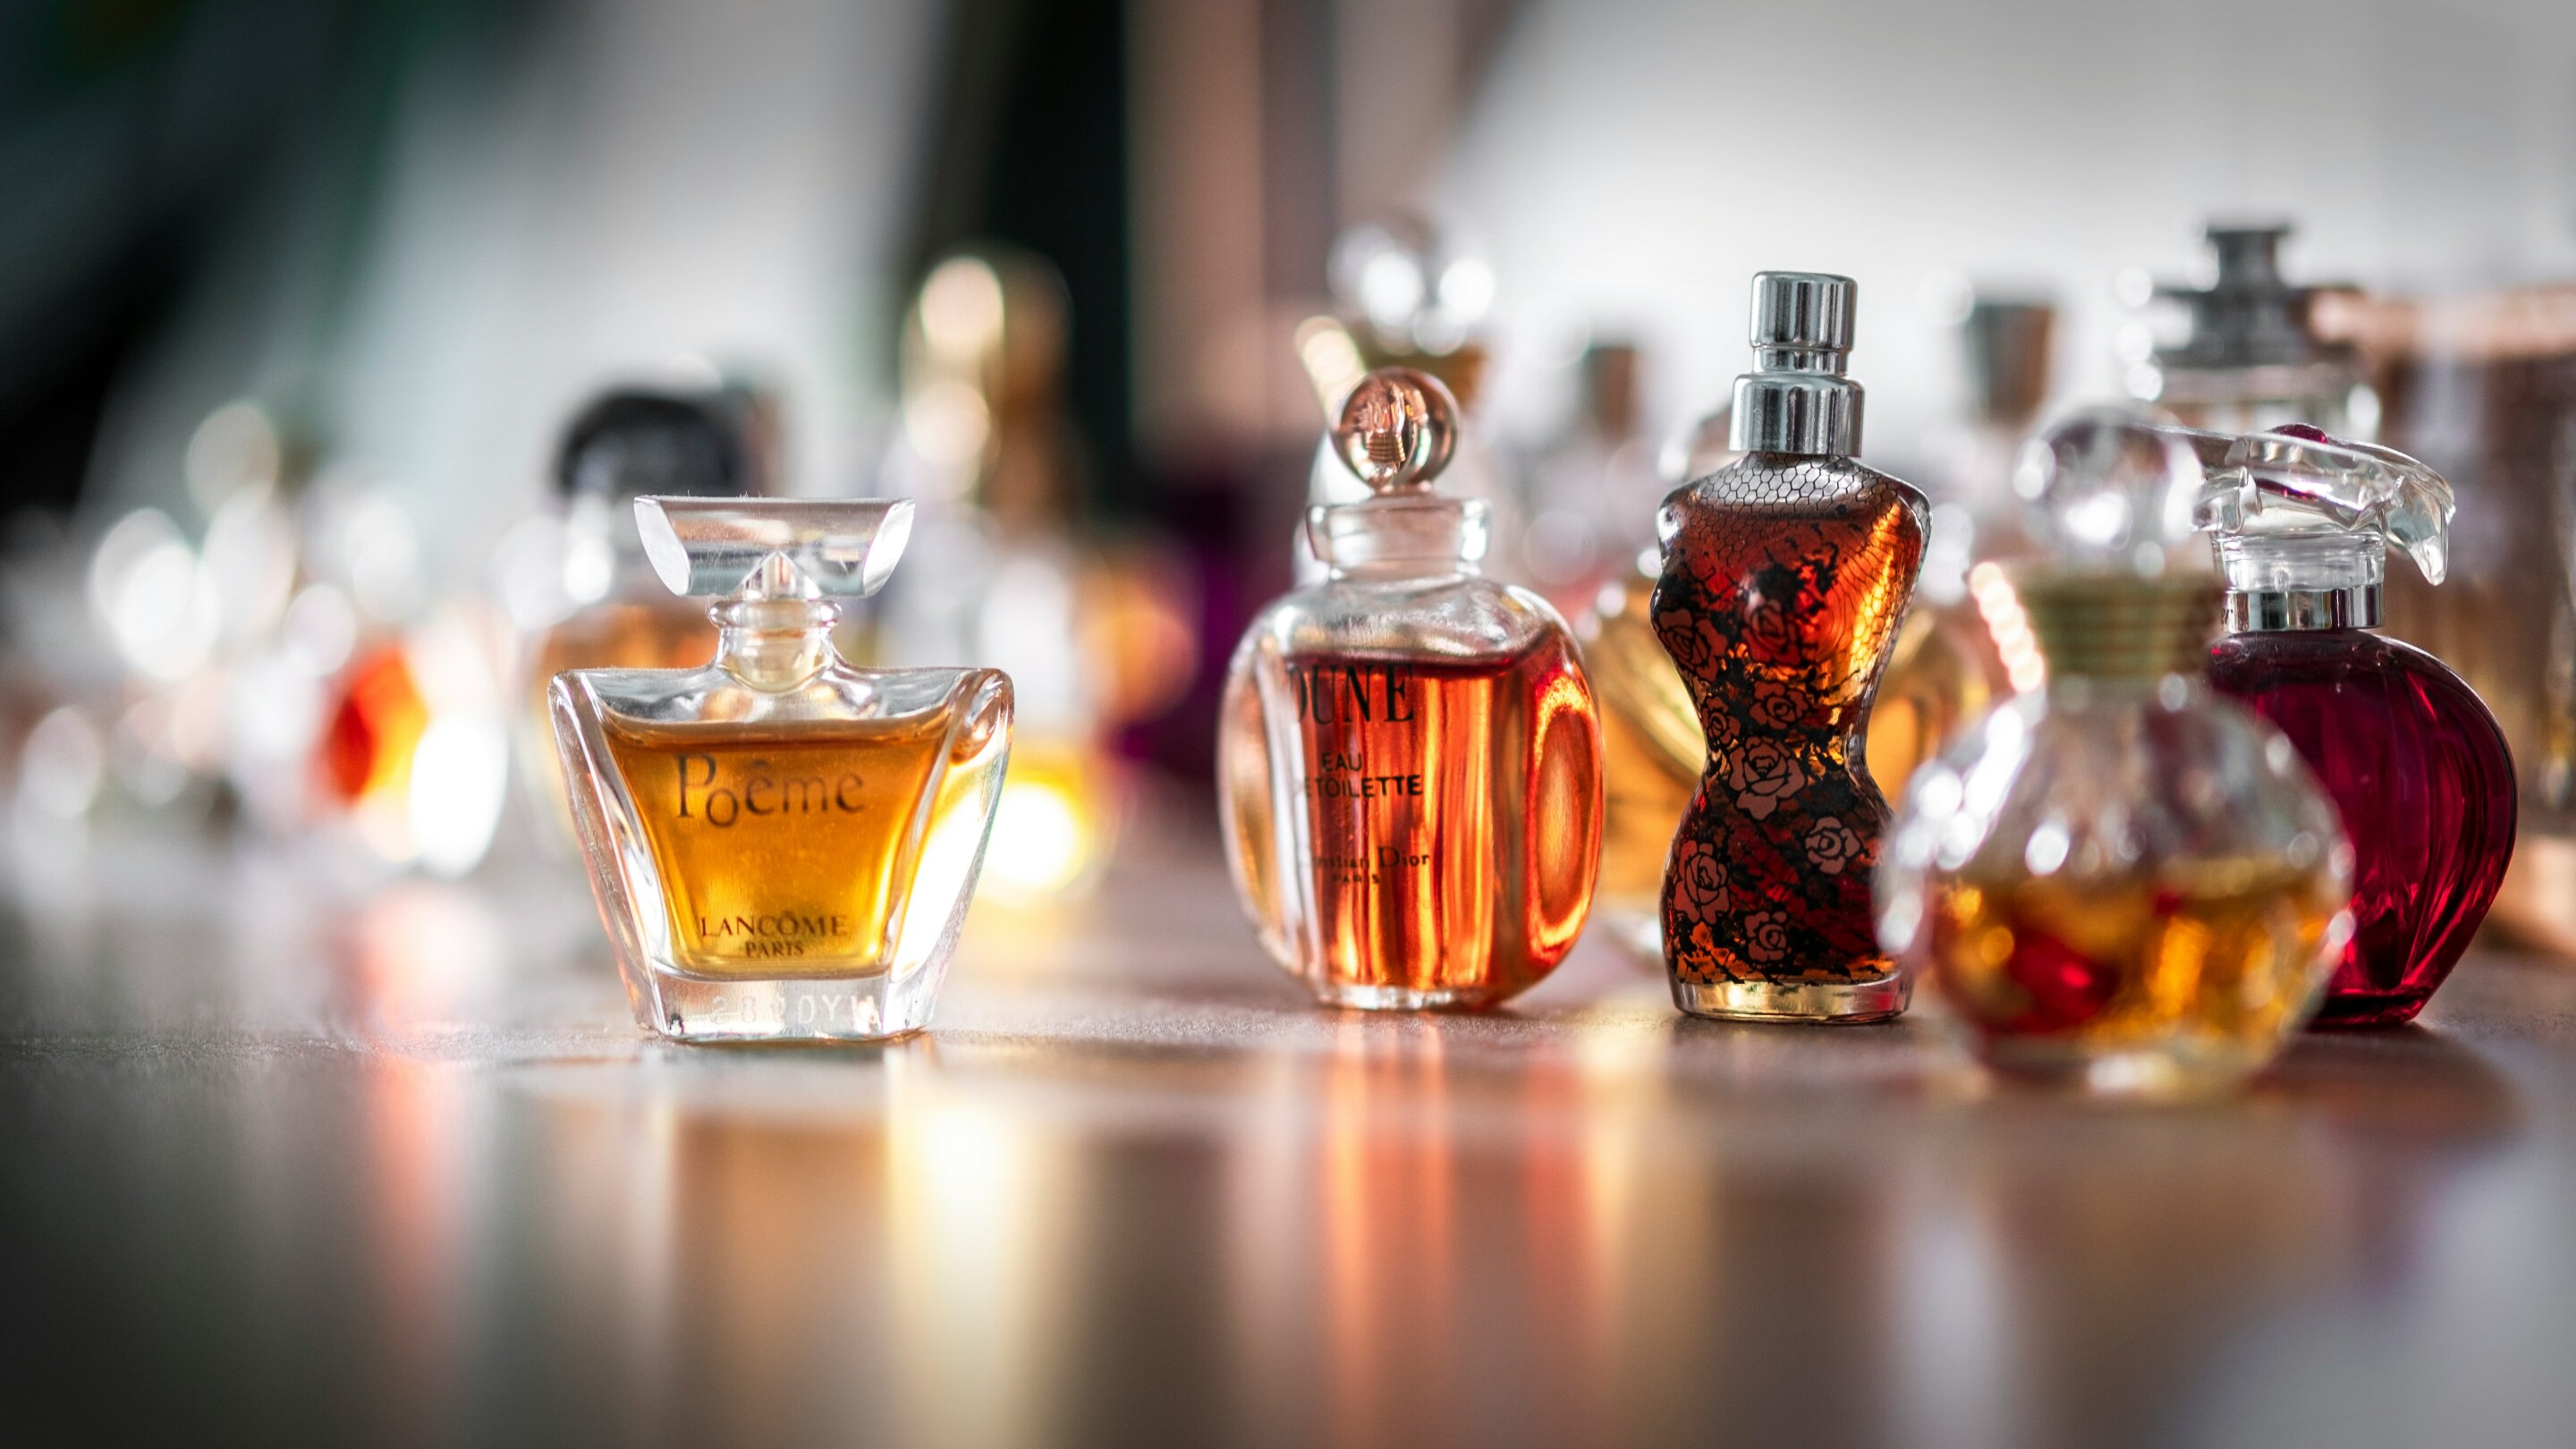 Atomizer of history: How perfume research has shaped a century of scientific innovation